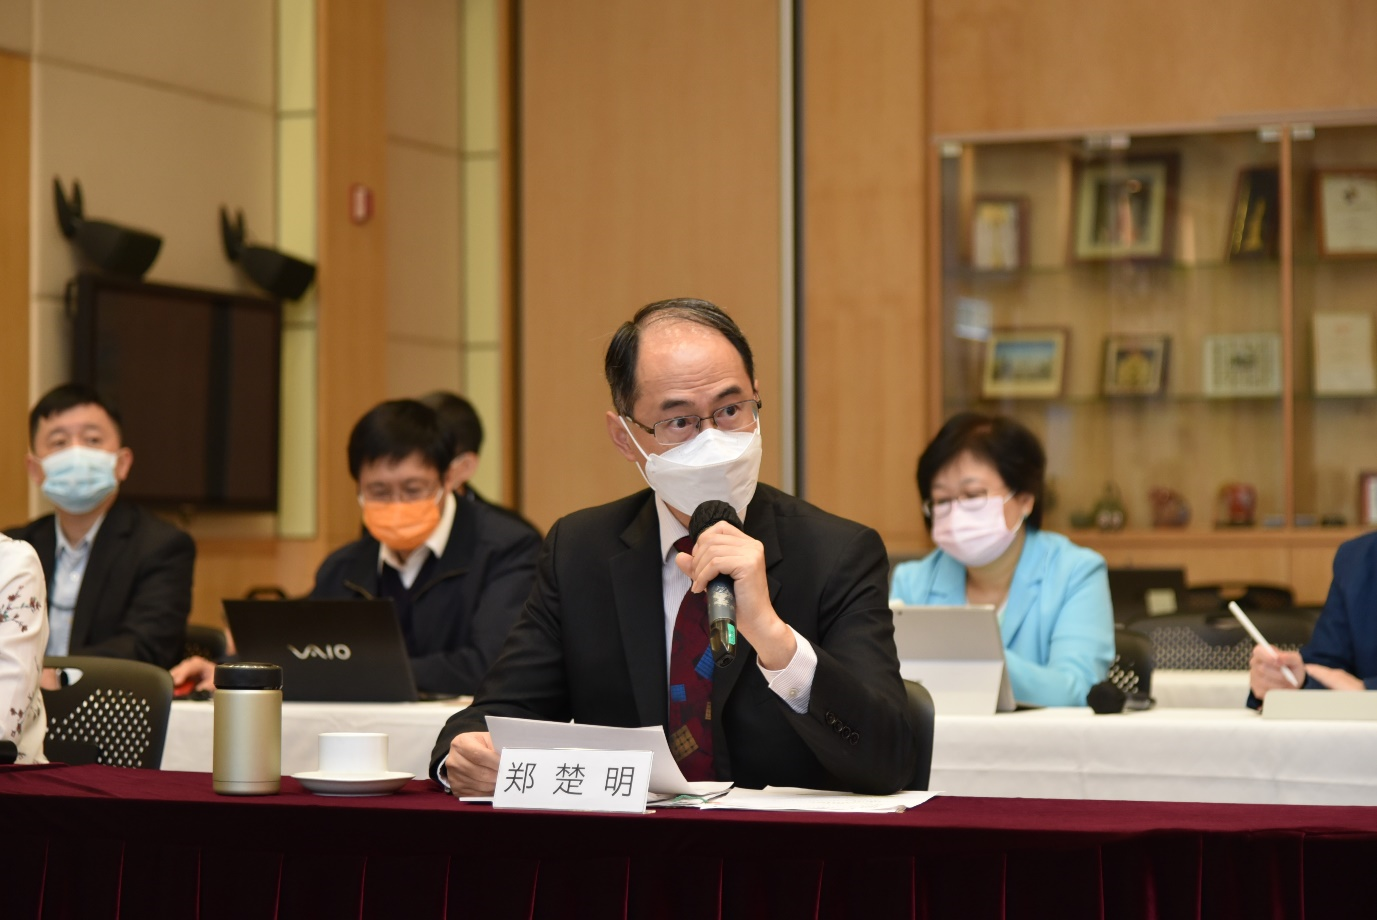 Dr Cheng Cho-ming (middle), Director of the Hong Kong Observatory, gave a speech during the 26th Guangdong - Hong Kong - Macao Meeting on Cooperation in Meteorological Operations